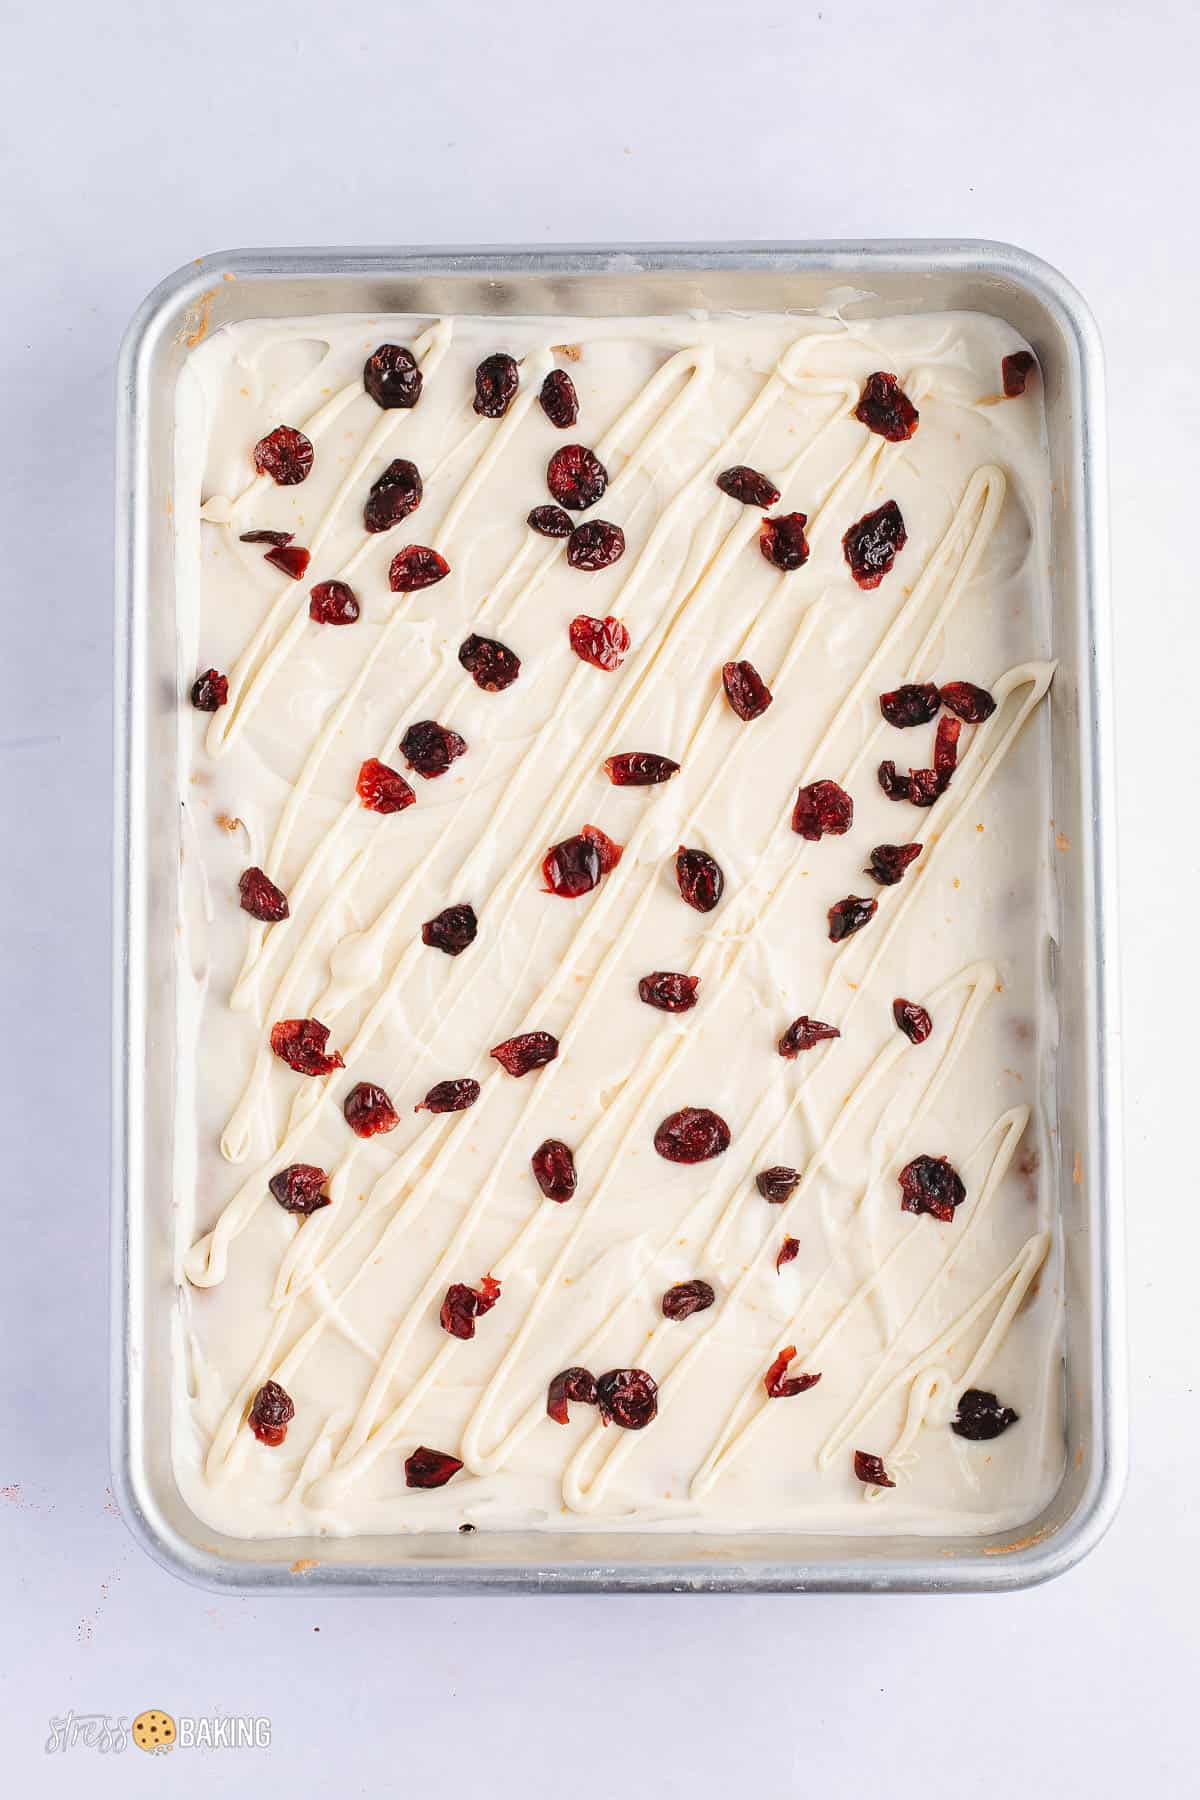 Cranberry bliss bars in a baking pan topped with white chocolate drizzle and dried cranberries